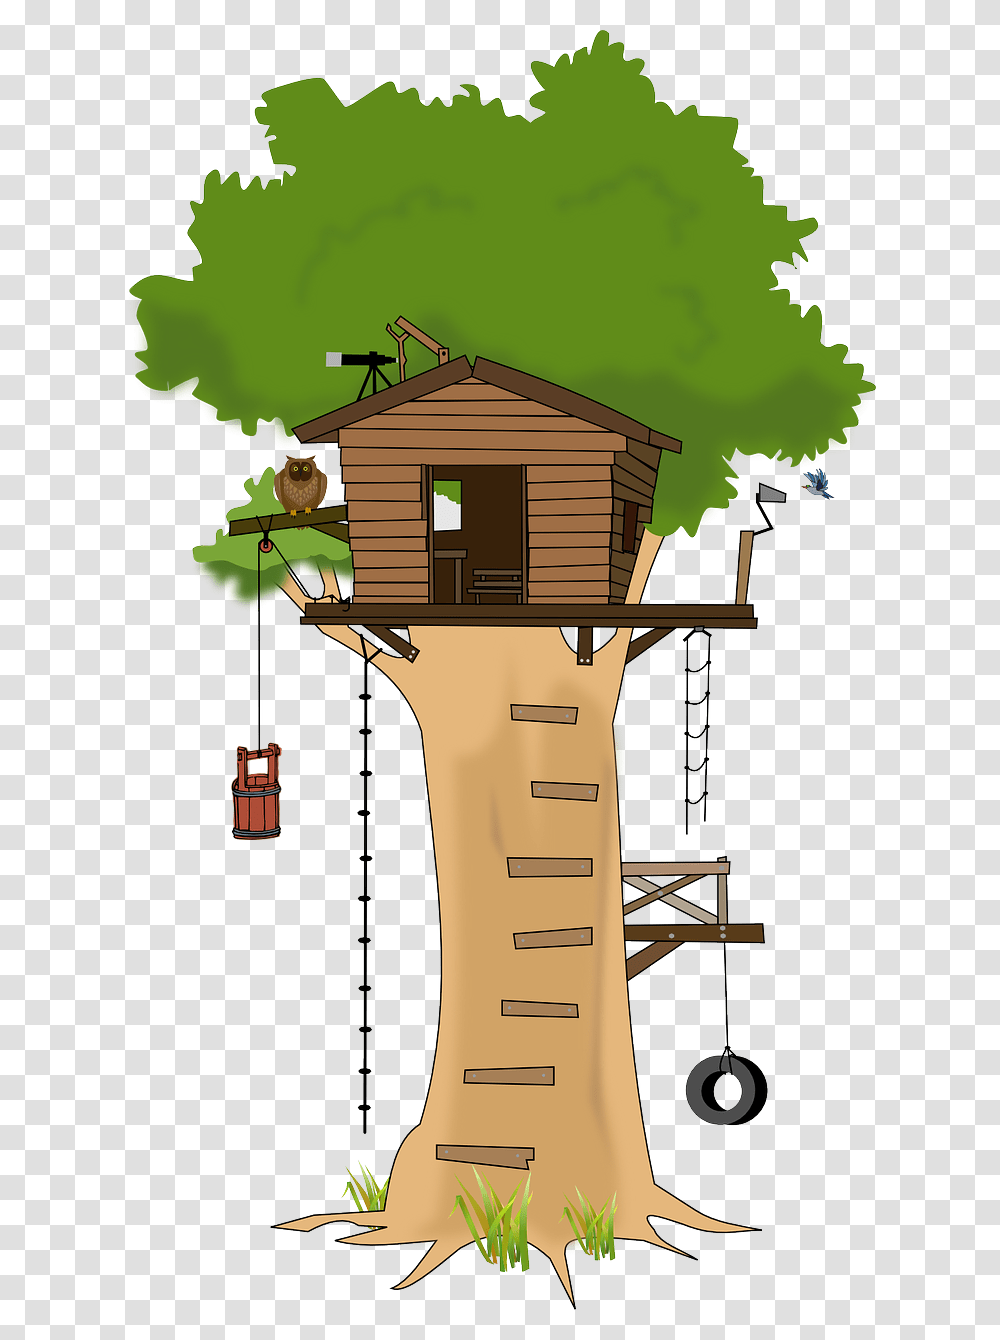 Tree House Format Ultra Background V Tree House Cartoon, Housing, Building, Cabin, Neighborhood Transparent Png